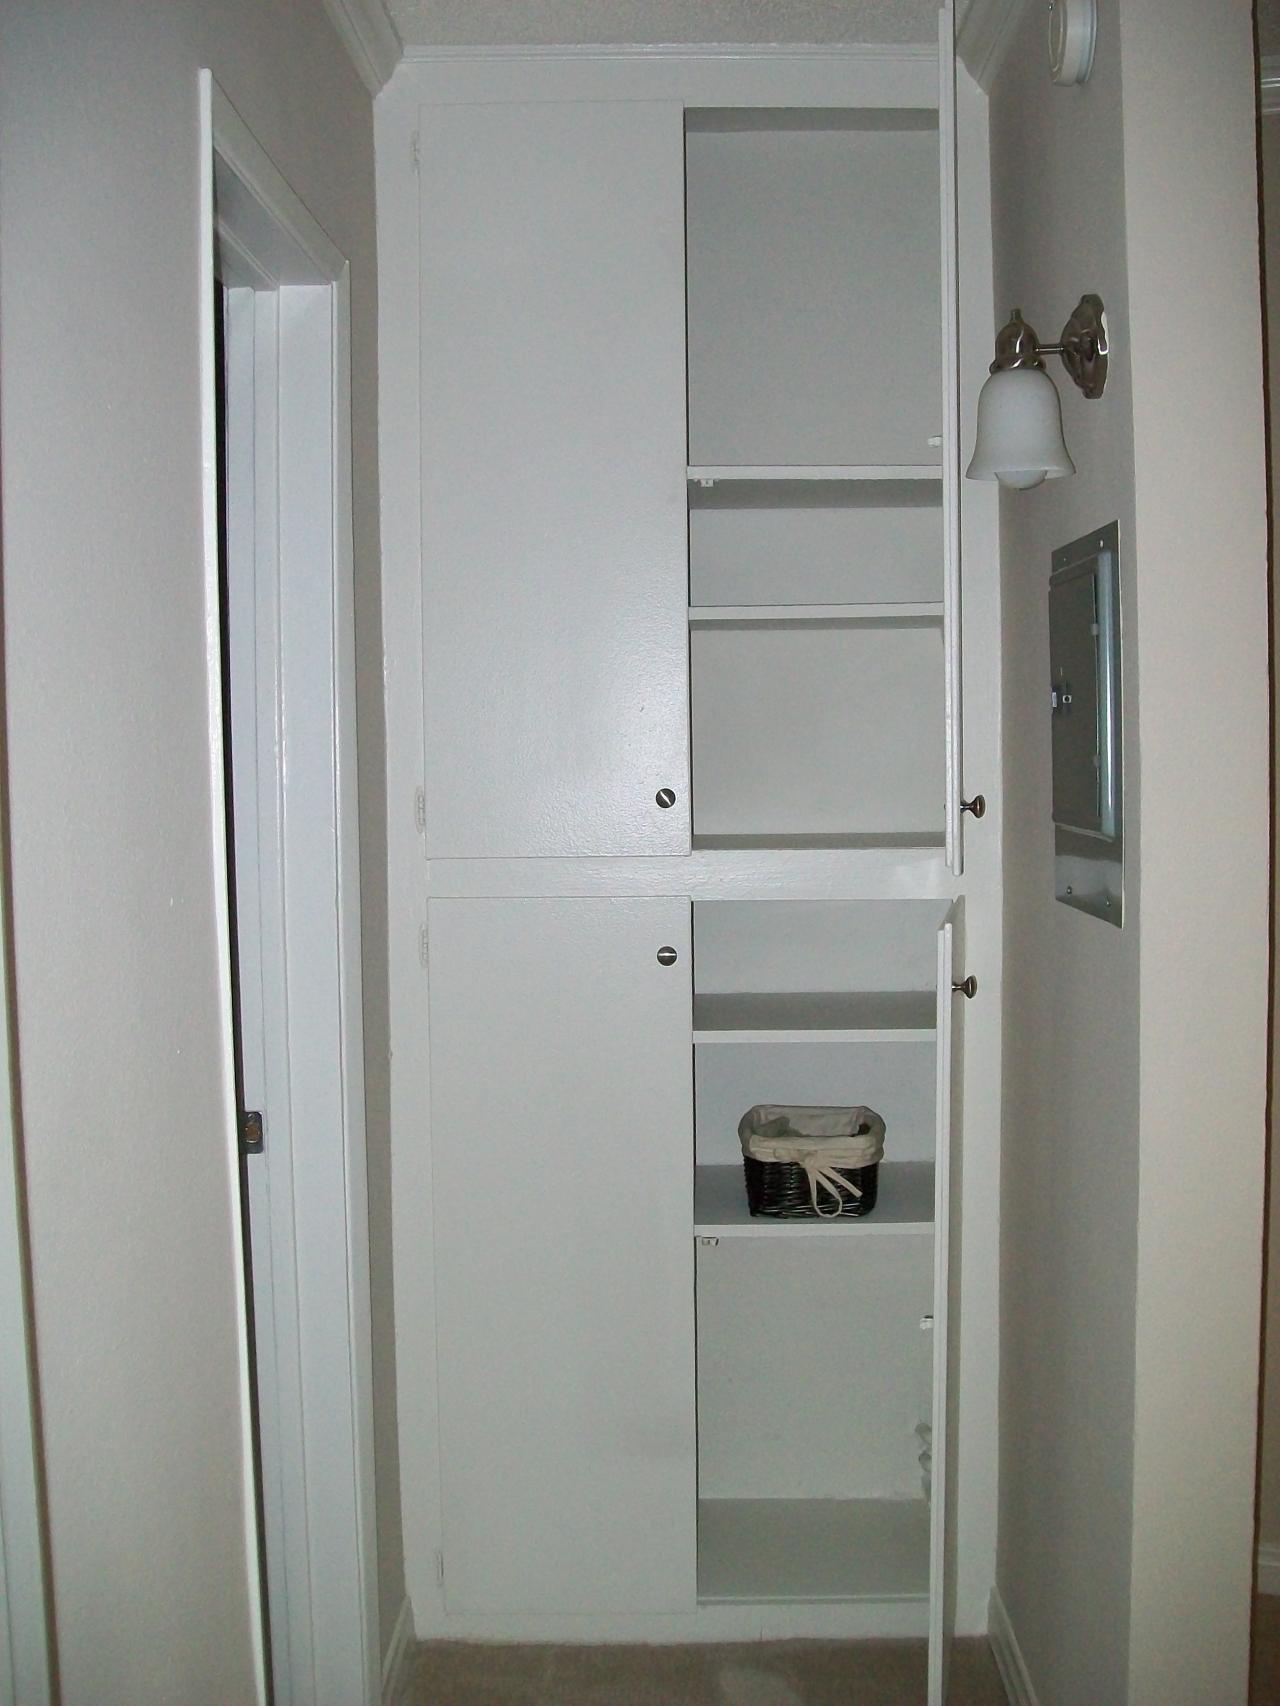 Photo of Kingsbury Villas Apartments - a view of apartment interior storage closet space